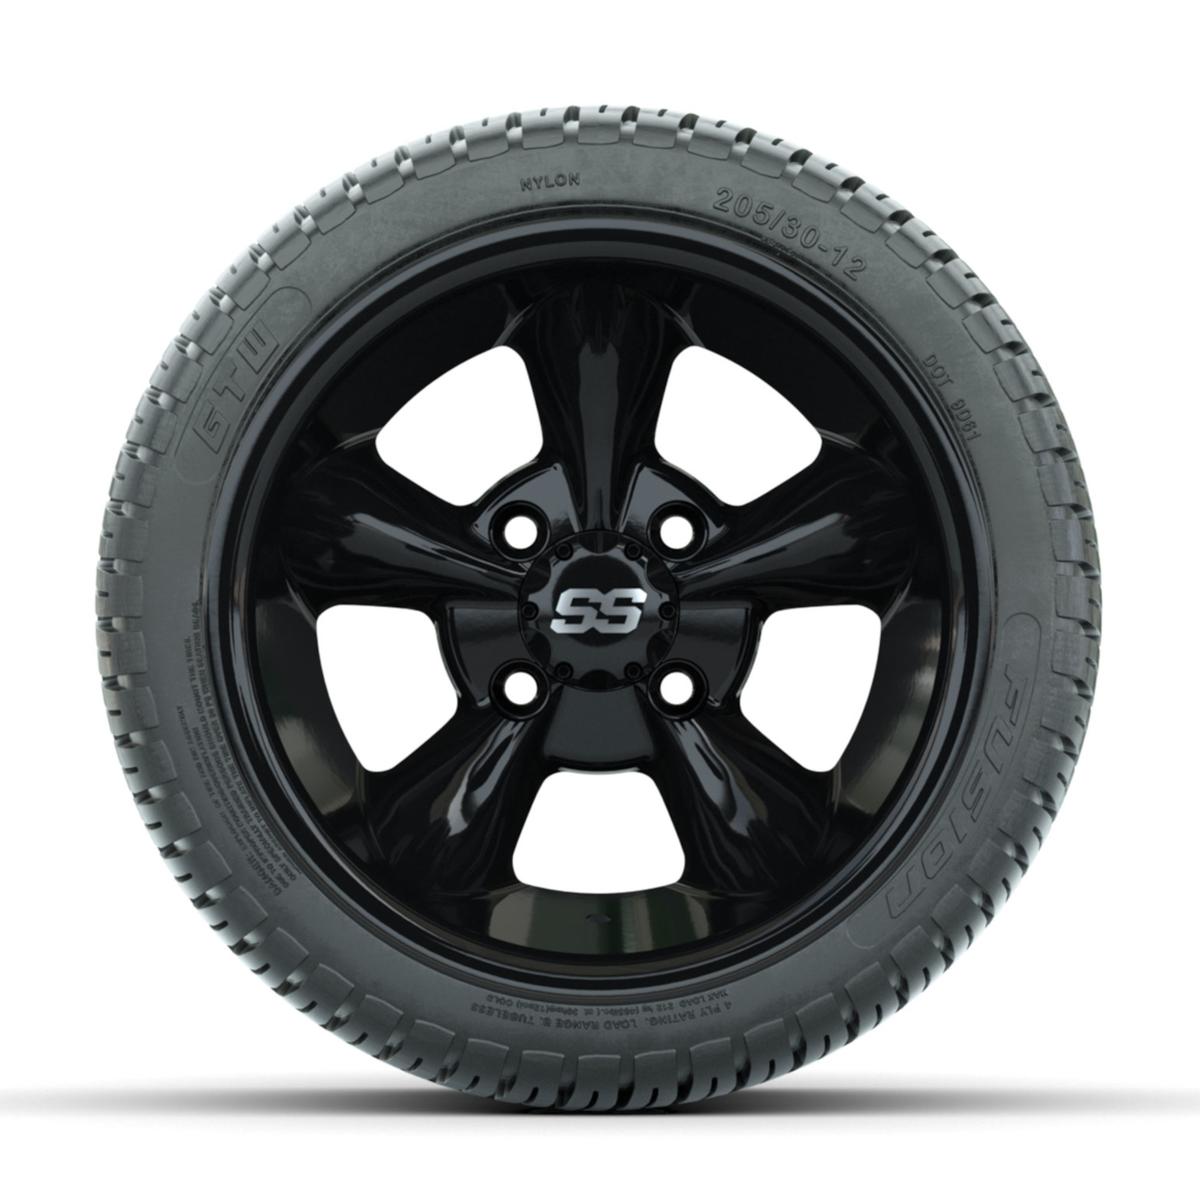 GTW Godfather Black 12 in Wheels with 205/30-12 Fusion Street Tires – Full Set